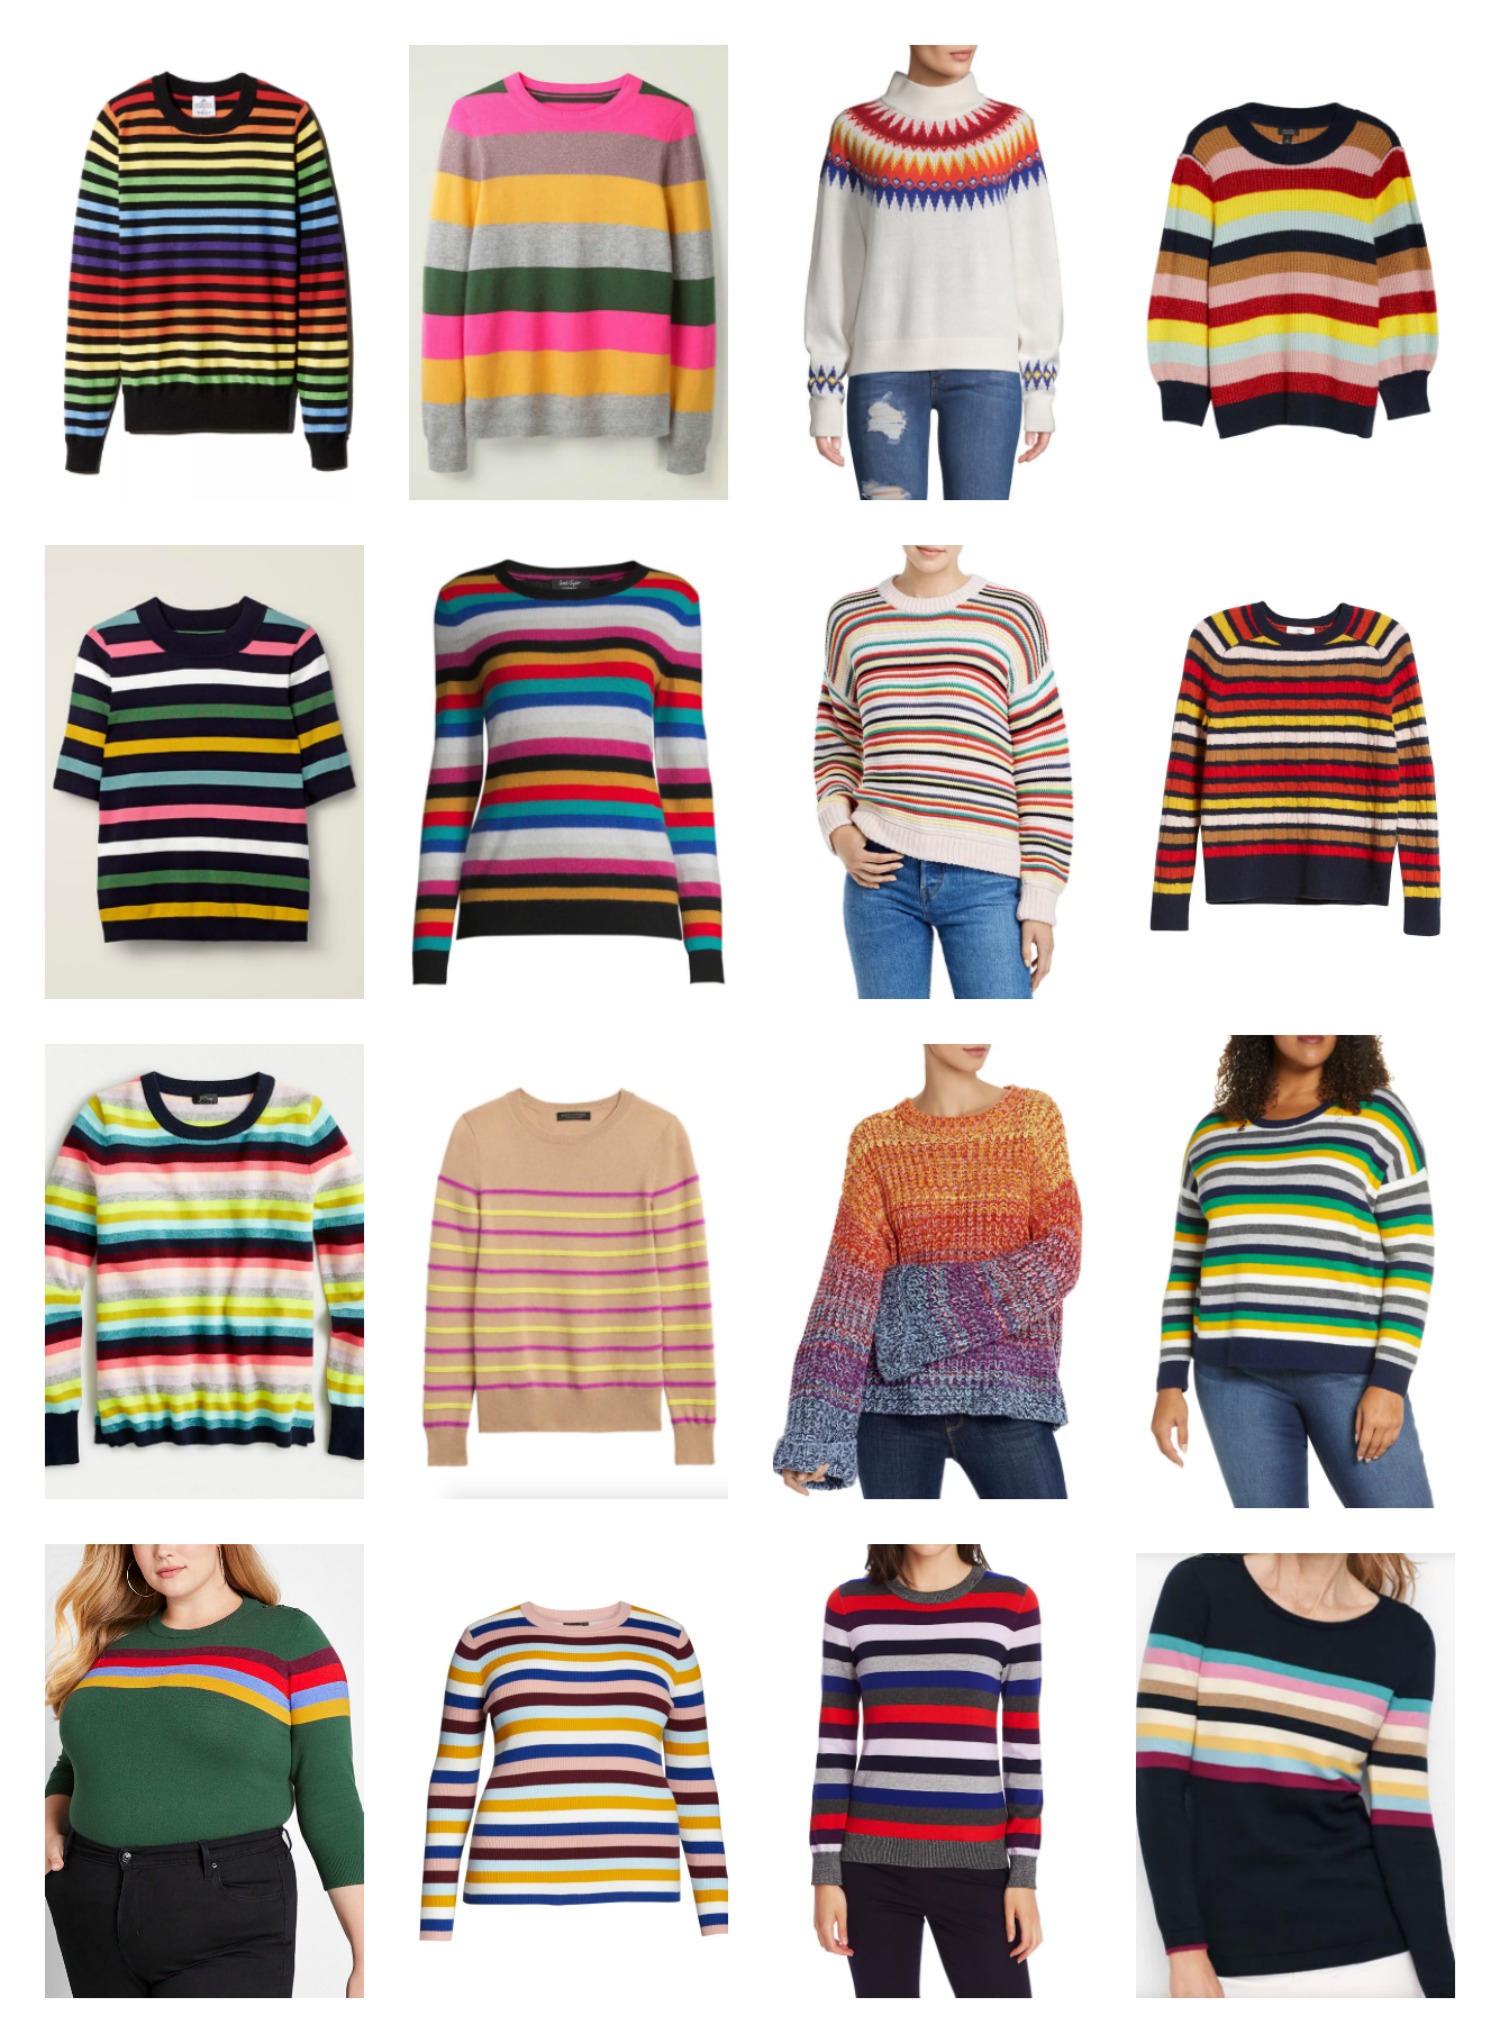 Sunshine on a Rainy Day: The Best Striped Sweaters - Wardrobe